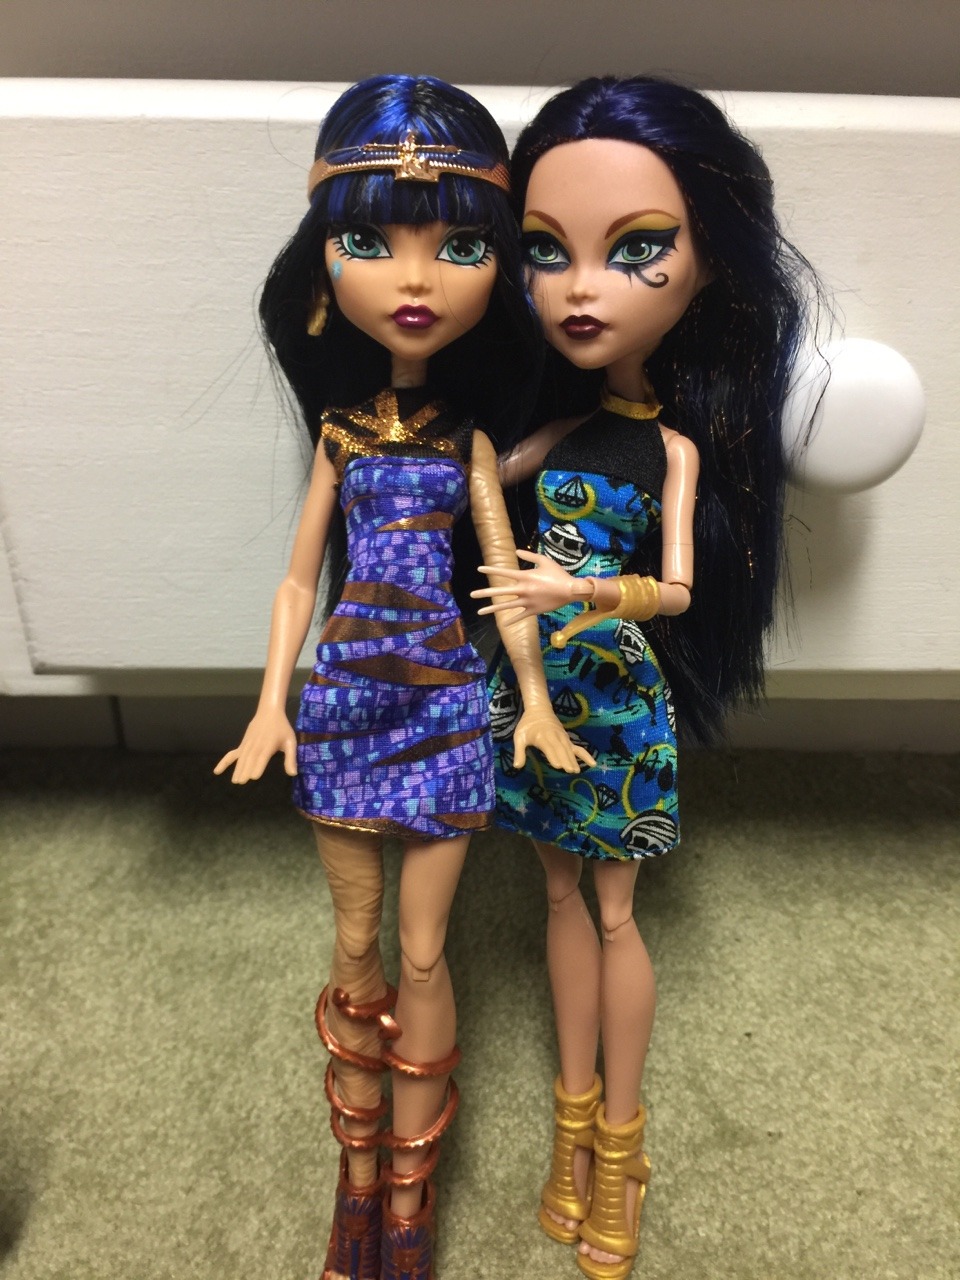 minxy-meow:
“ I adore the new Cleo.
I never collected Cleo the first year I got into MH, because she looked too human. I got over it obviously, she’s amazing, but these body mold wraps are killing it.
I like her face, just in different ways than...